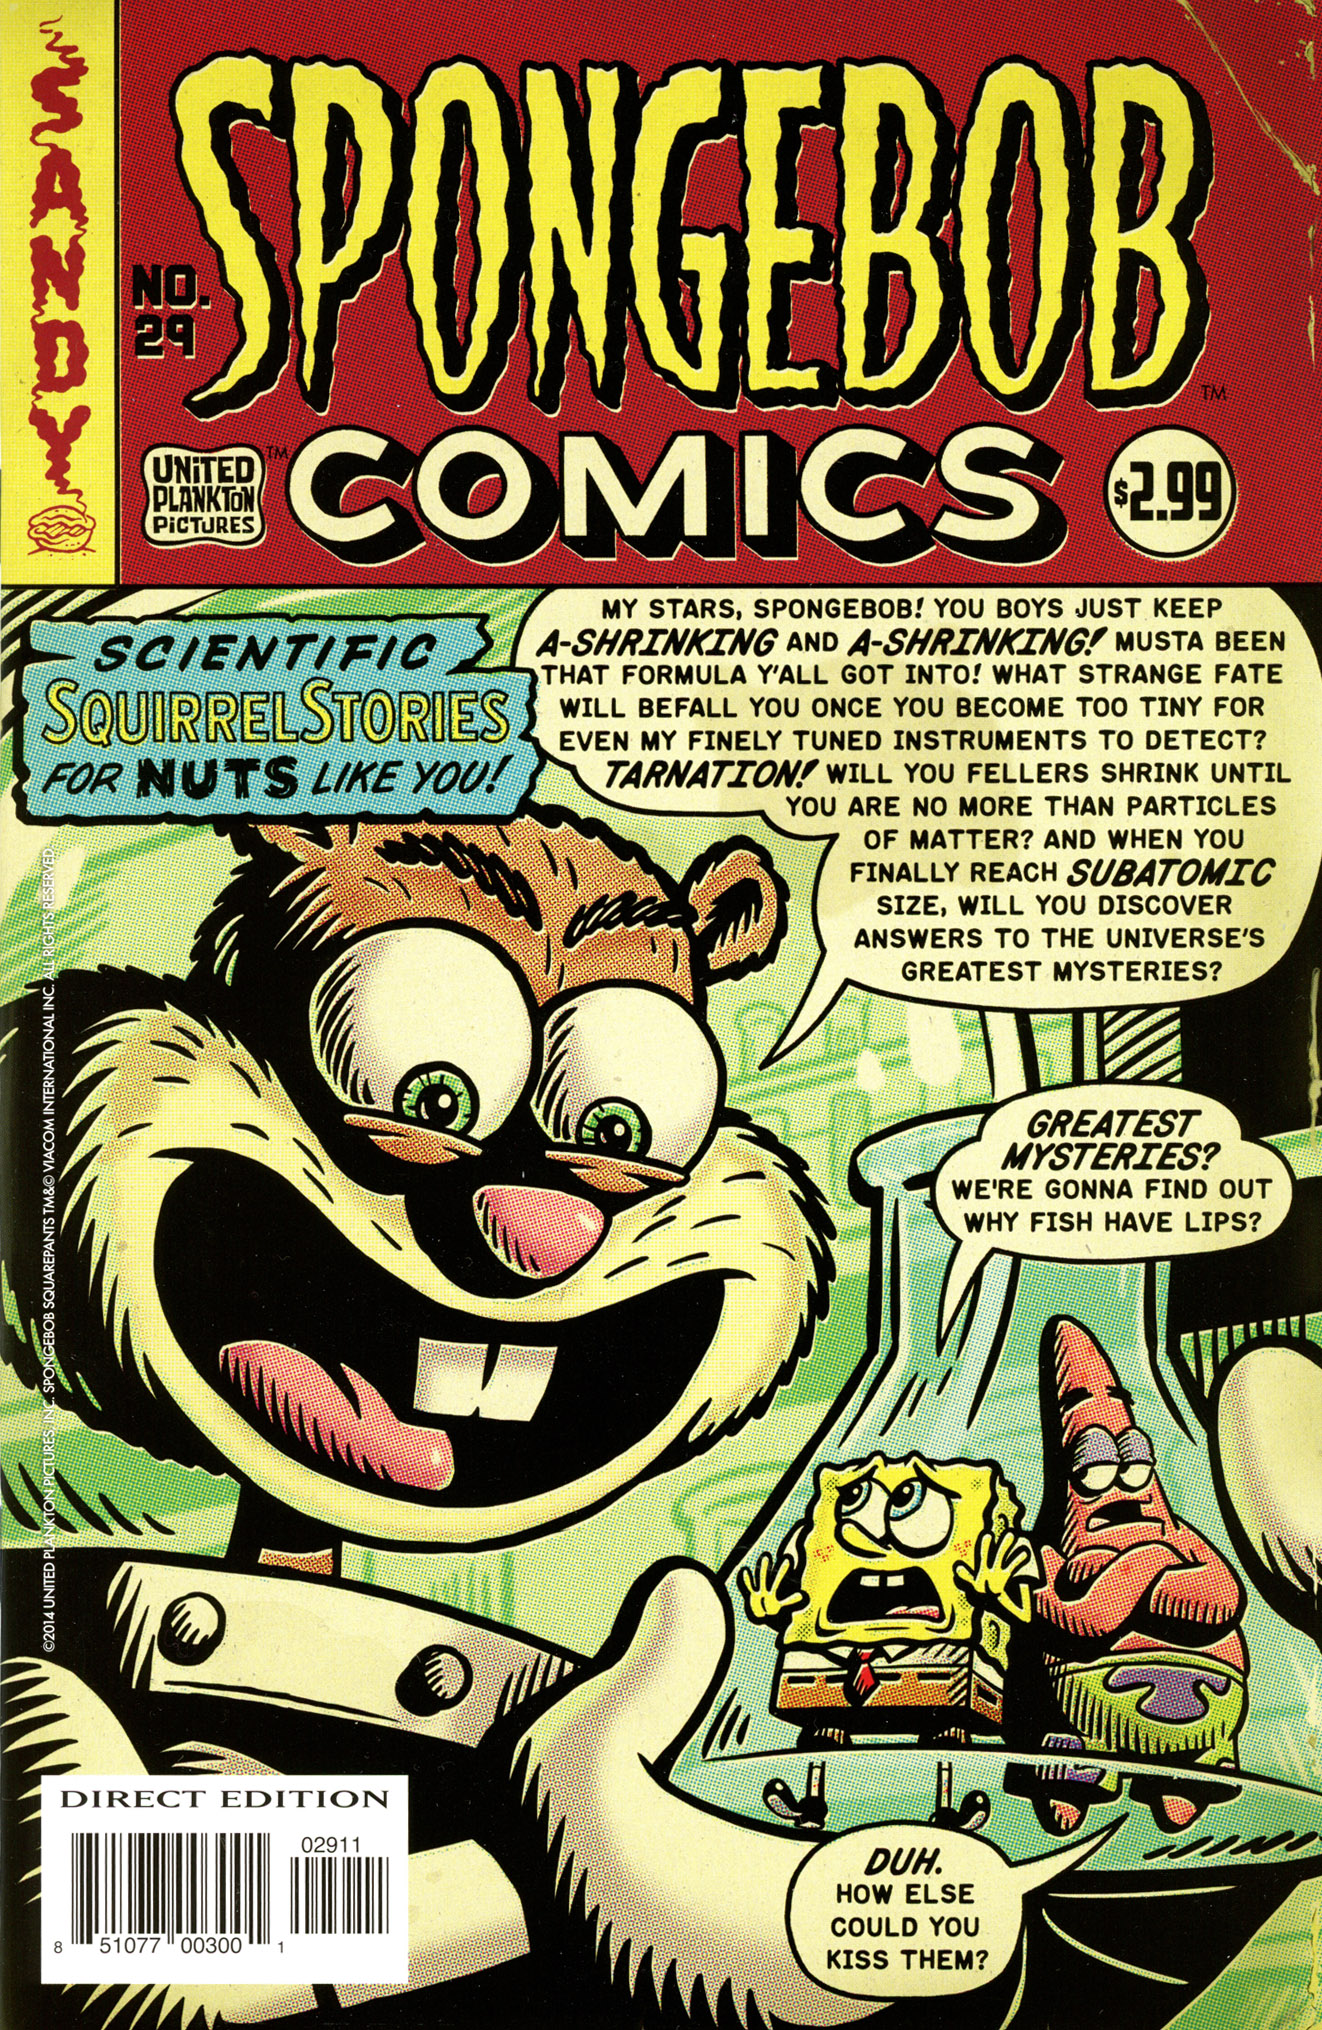 Scientific Stories for Nuts Like You!